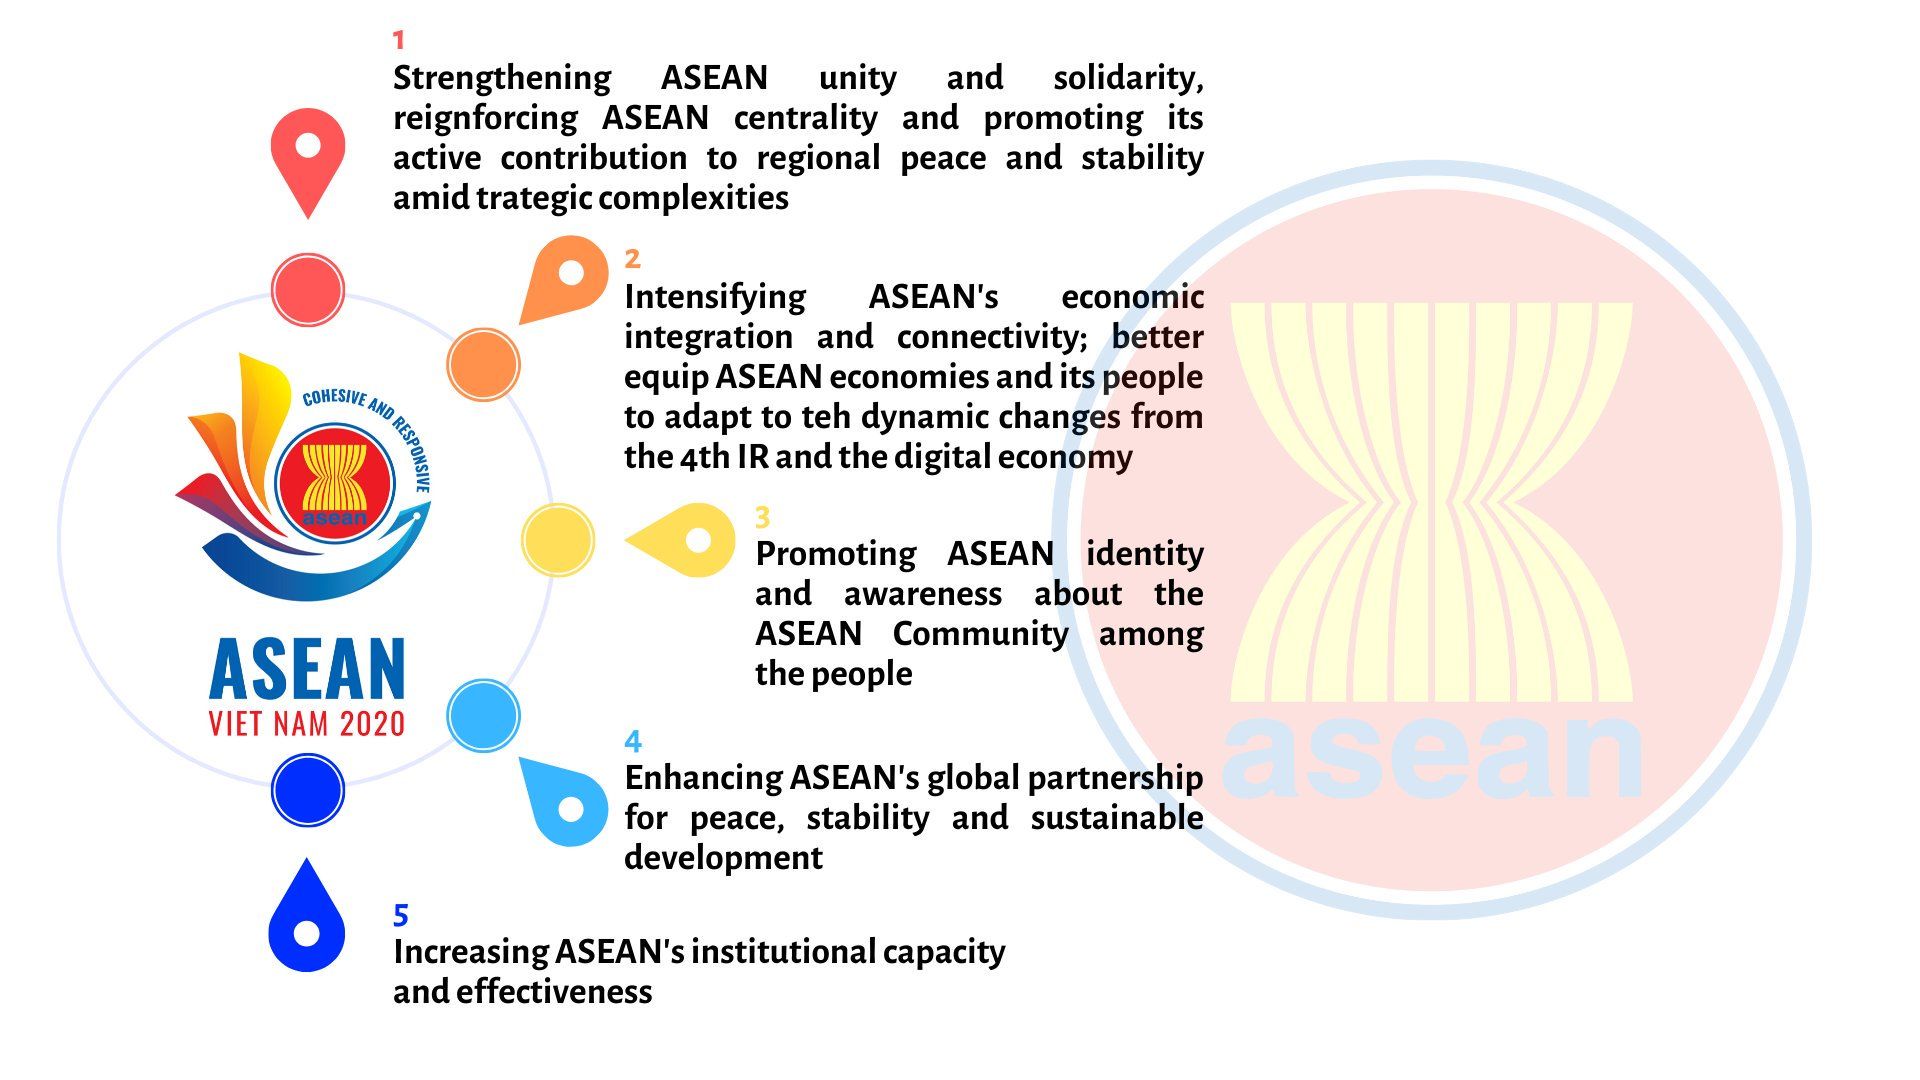 theme and priorities of vietnams 2020 asean chairmanship unveiled